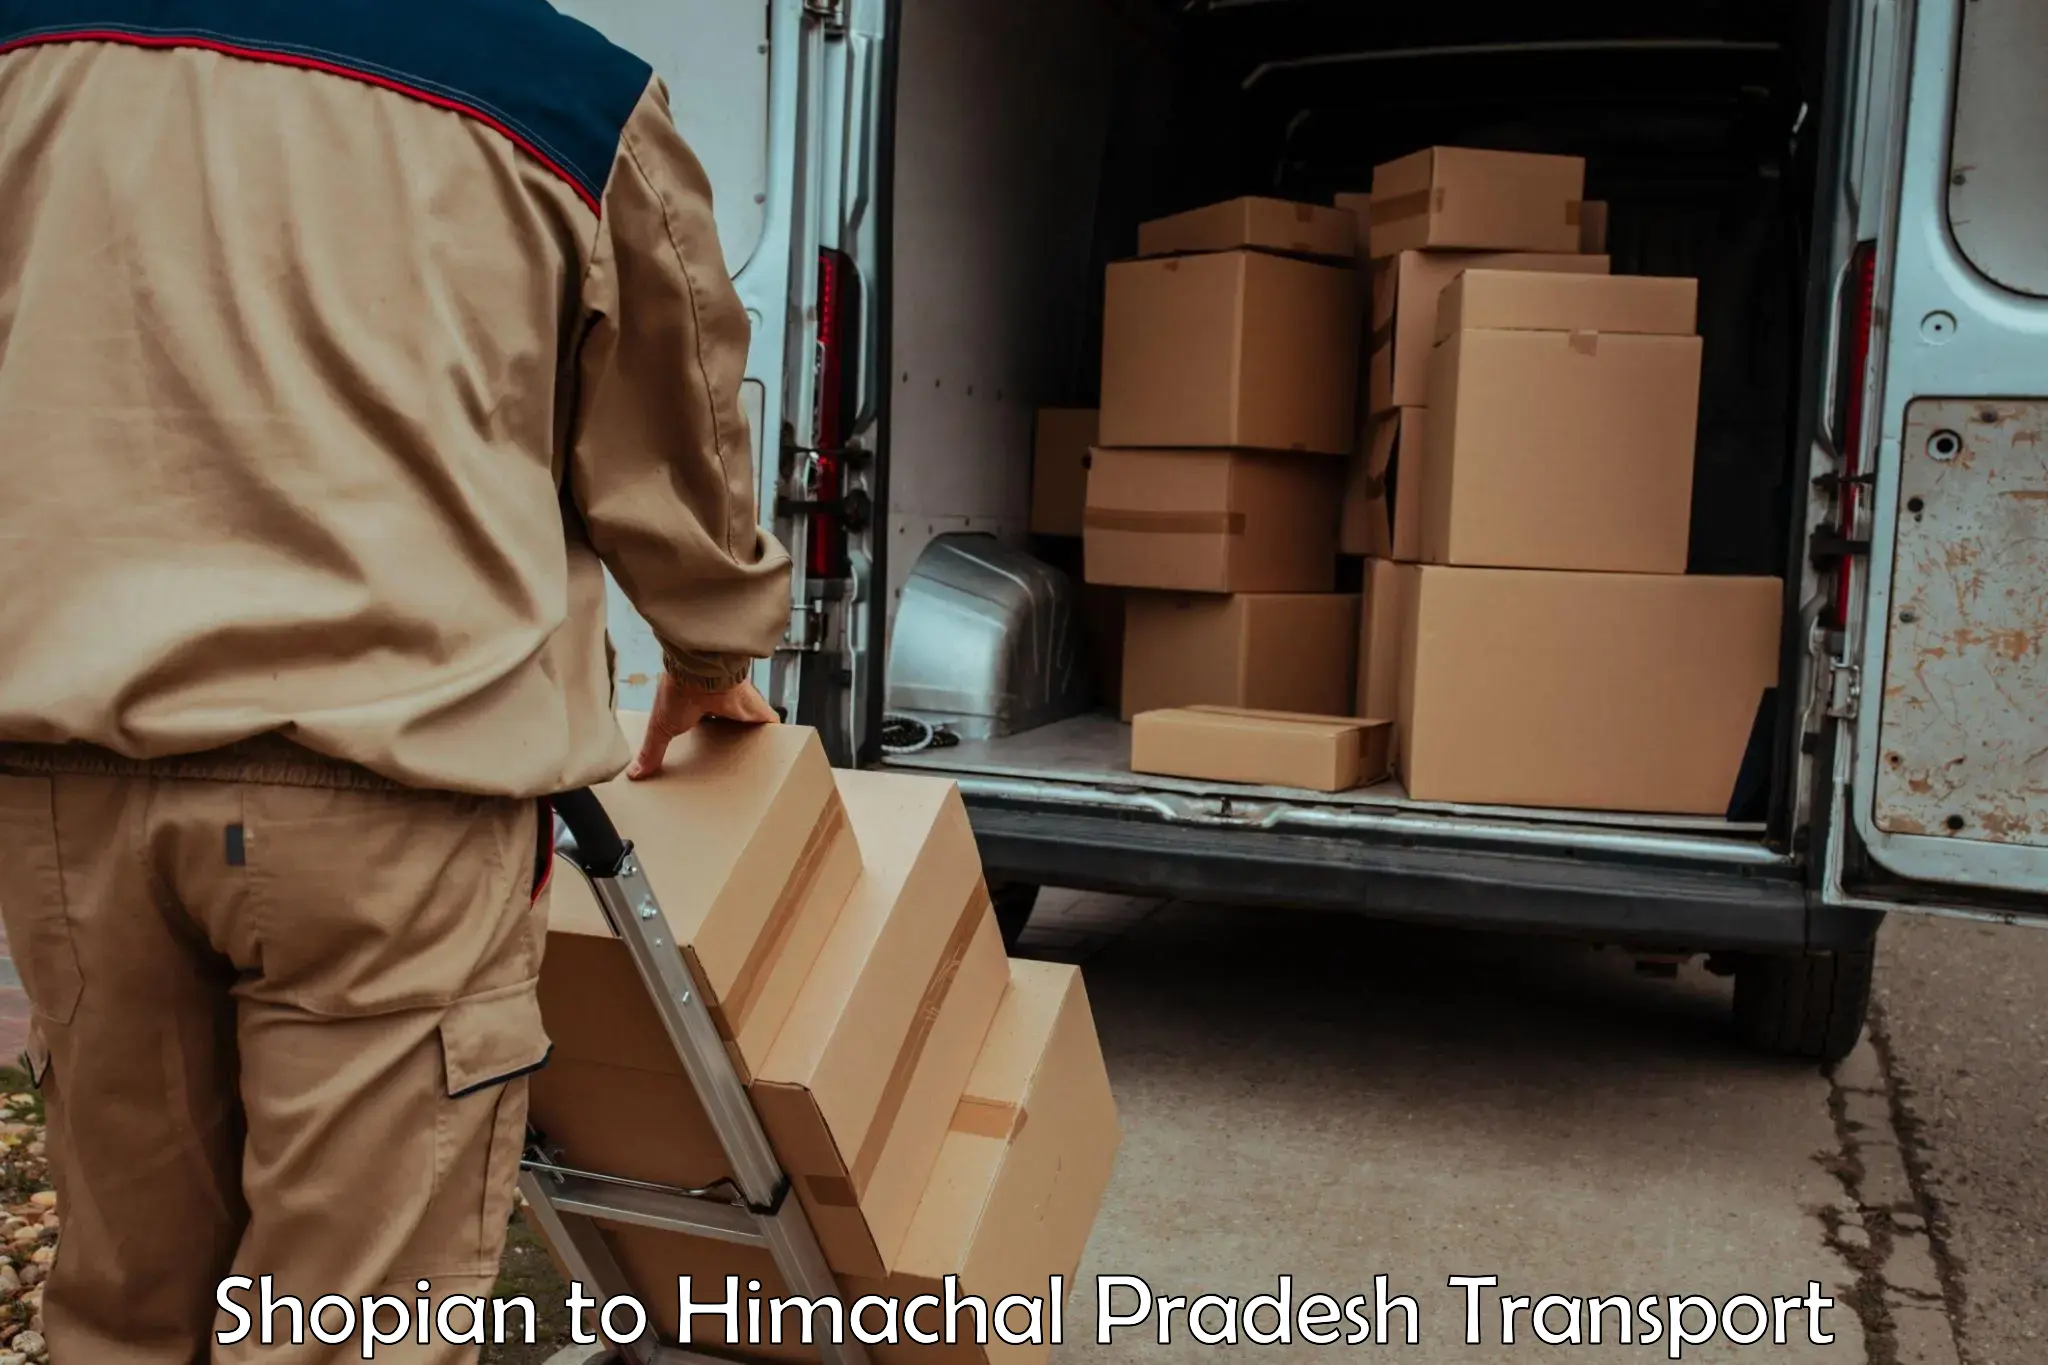 Part load transport service in India Shopian to Mandi